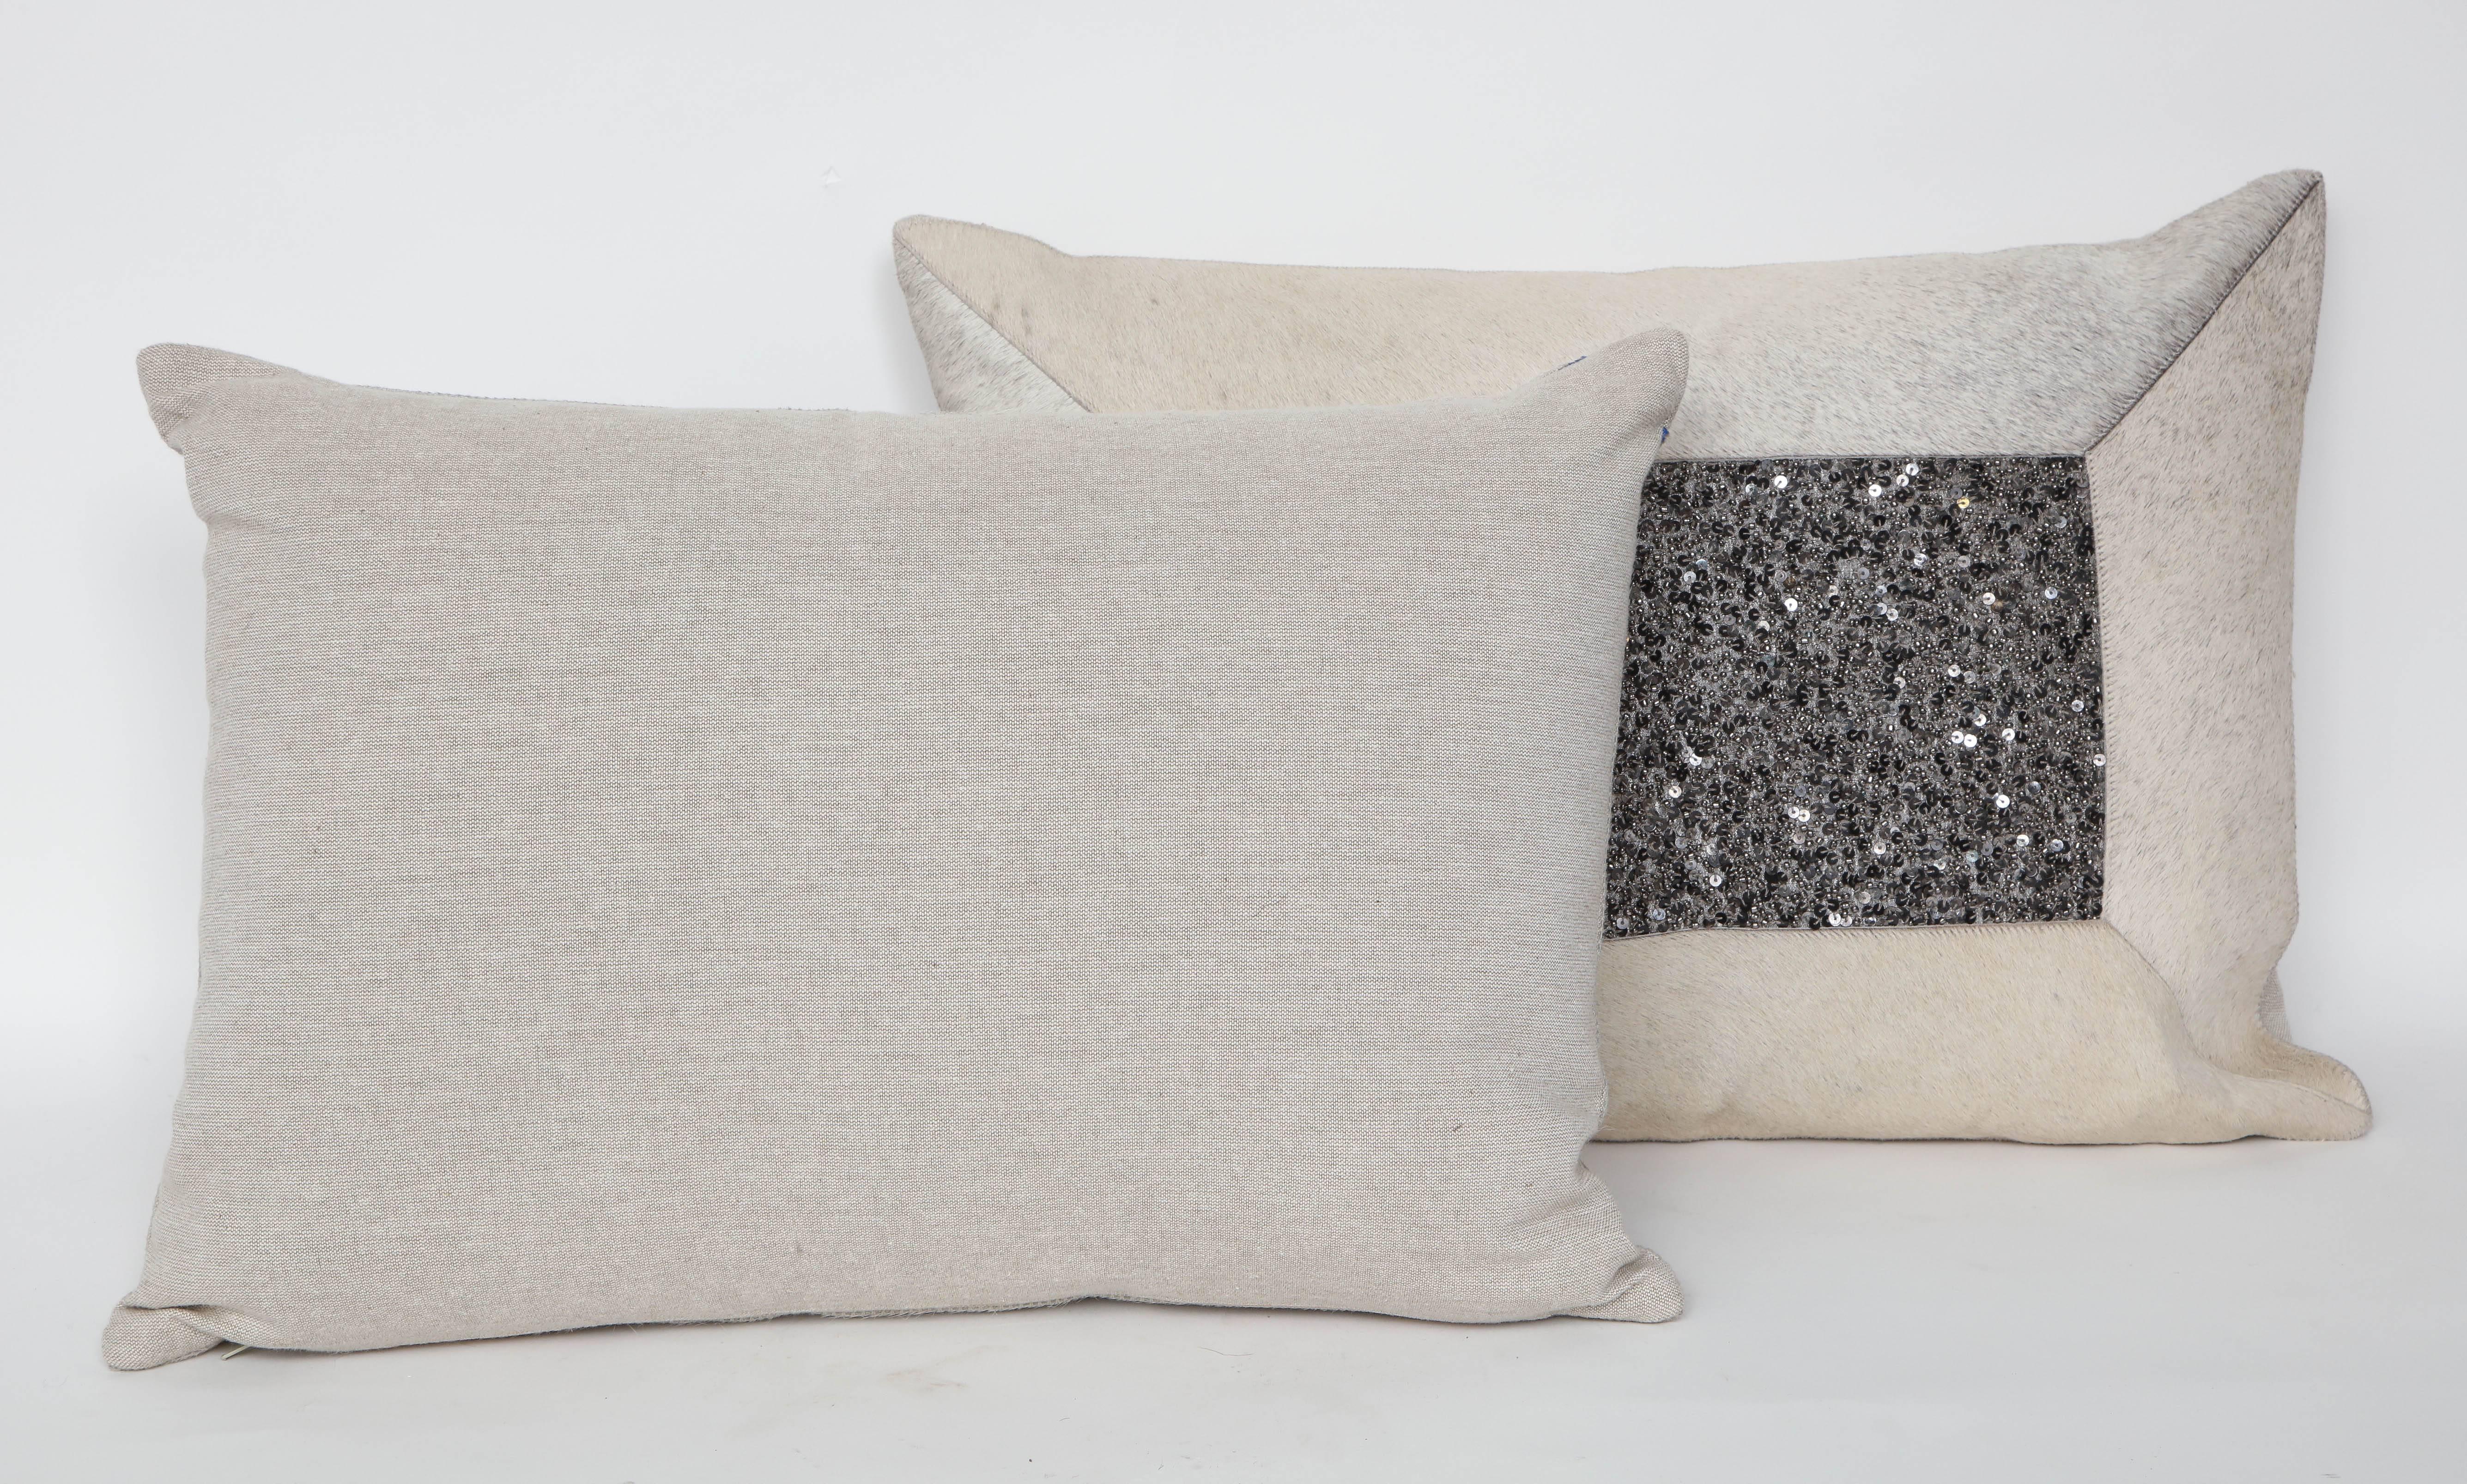 Organic Modern Pair of White Brindle Hide and Bead Pillows For Sale